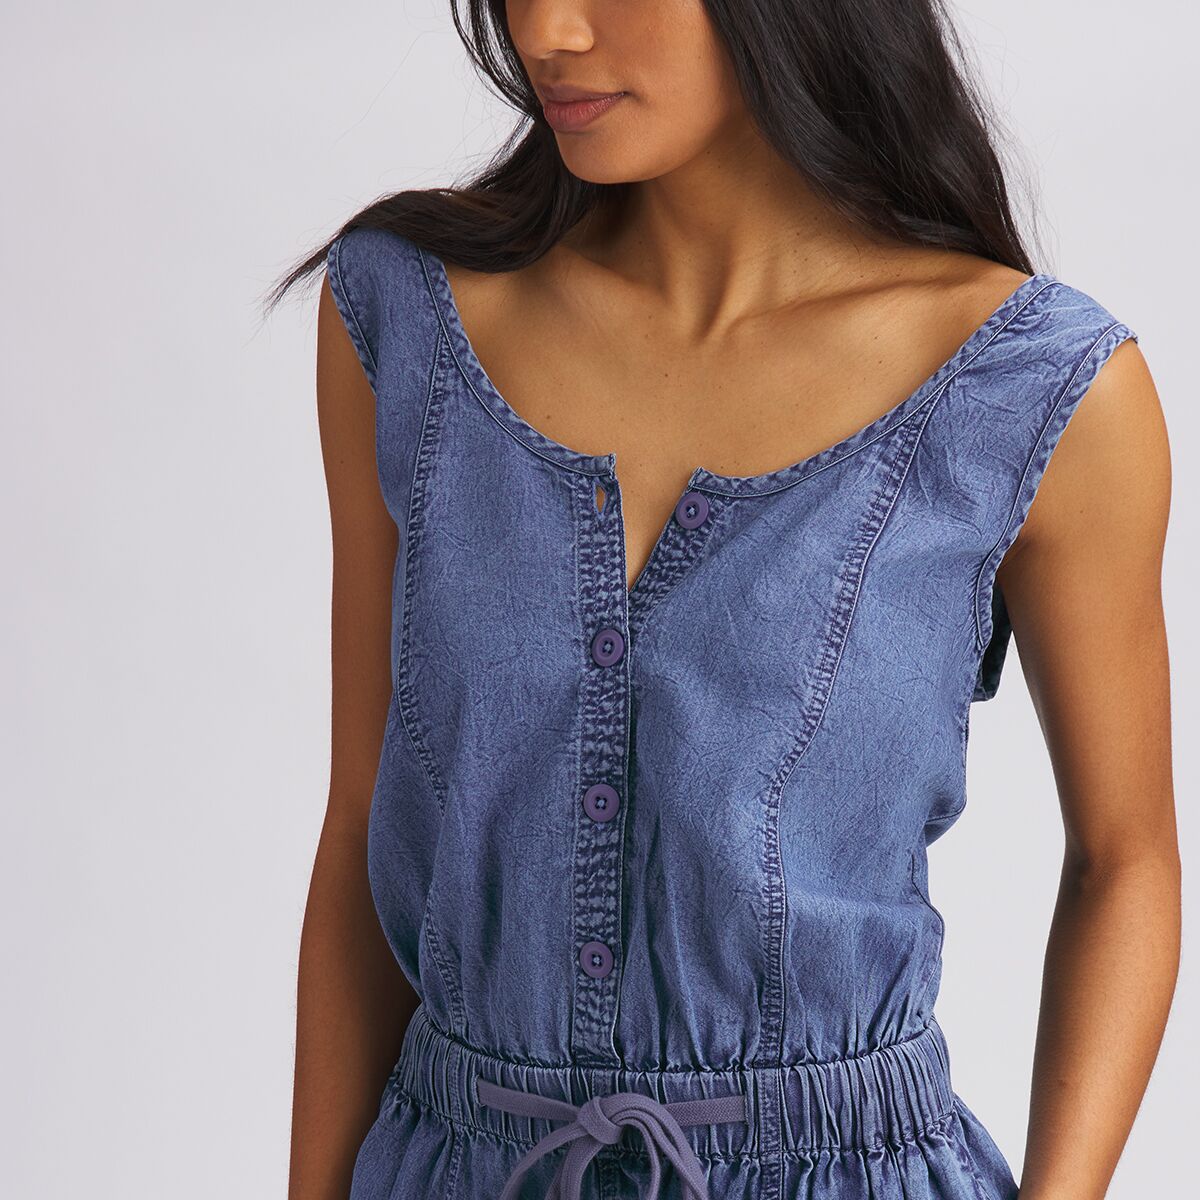 With Nice Price ⊦ Basin and Range Sleeveless Denim Jumpsuit - Women's  Discount Sale Online